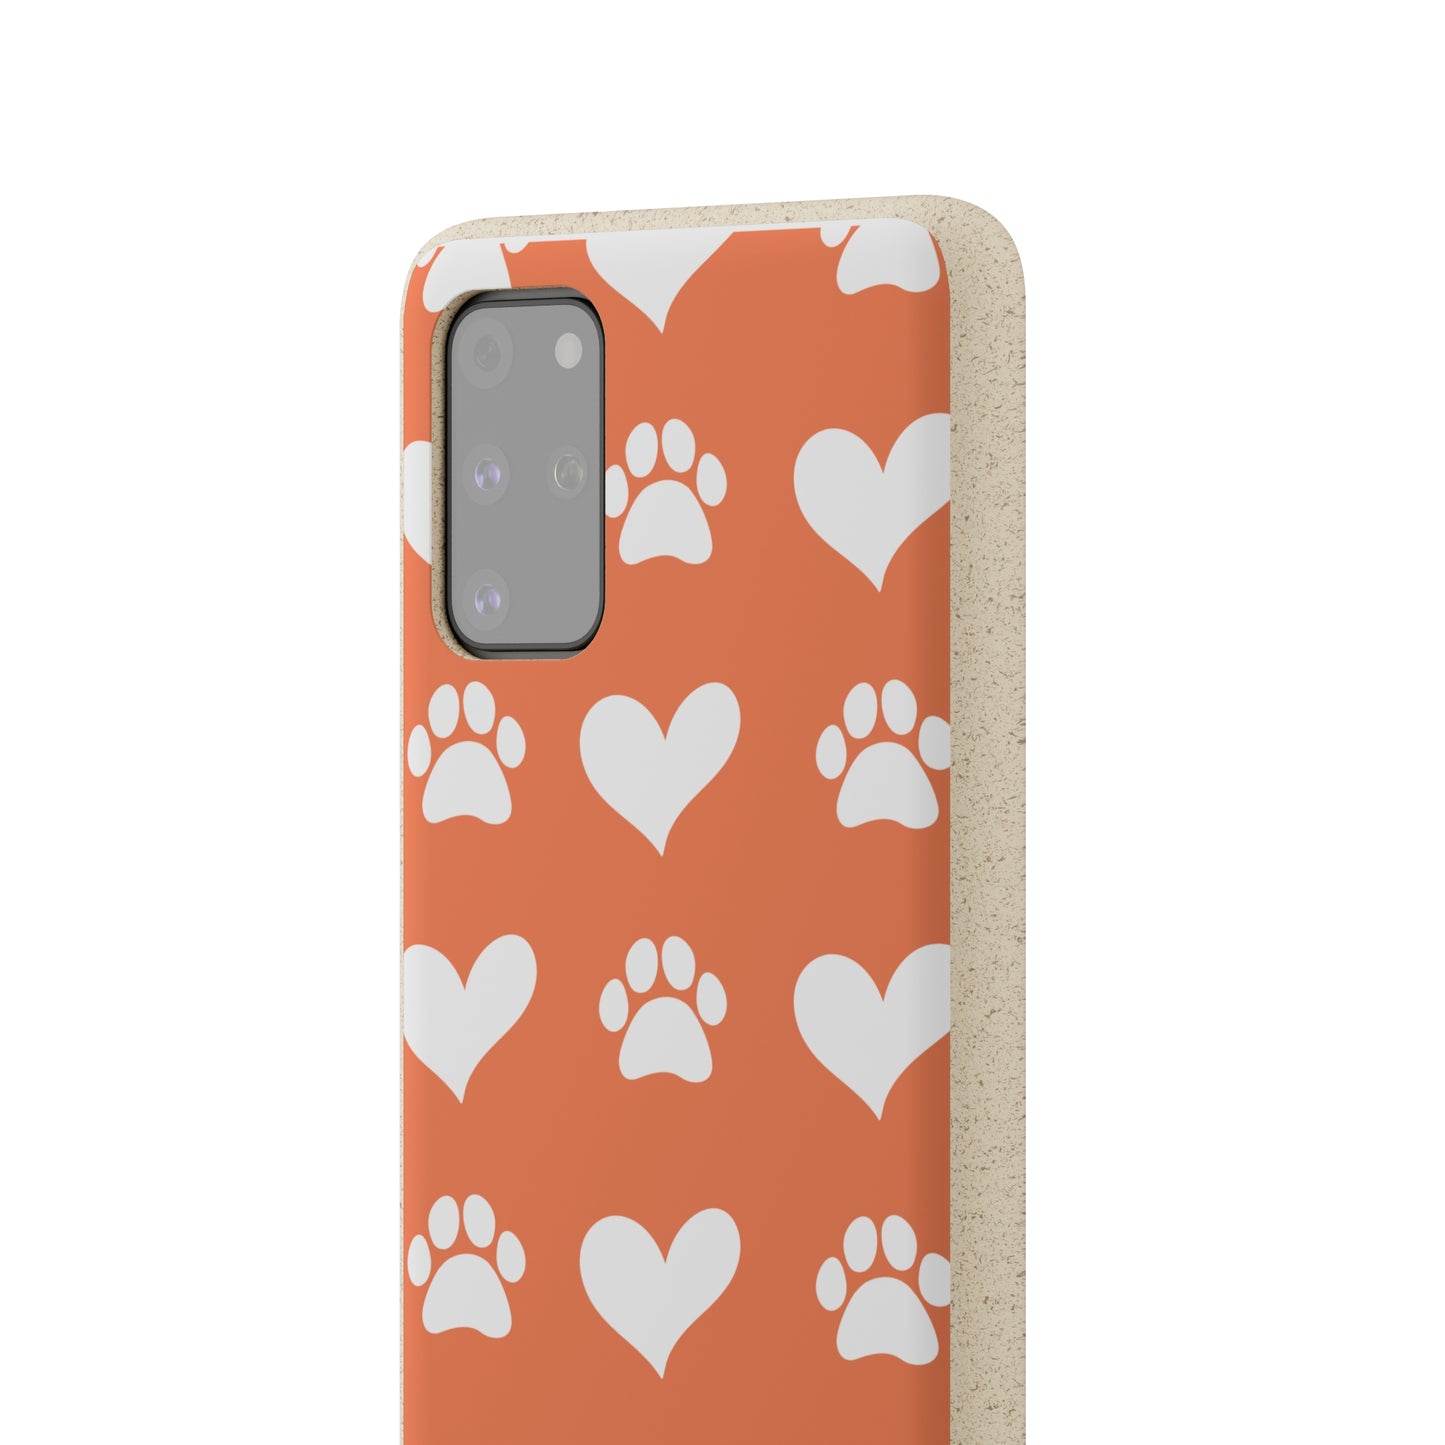 Paws of Love | Protective Biodegradable